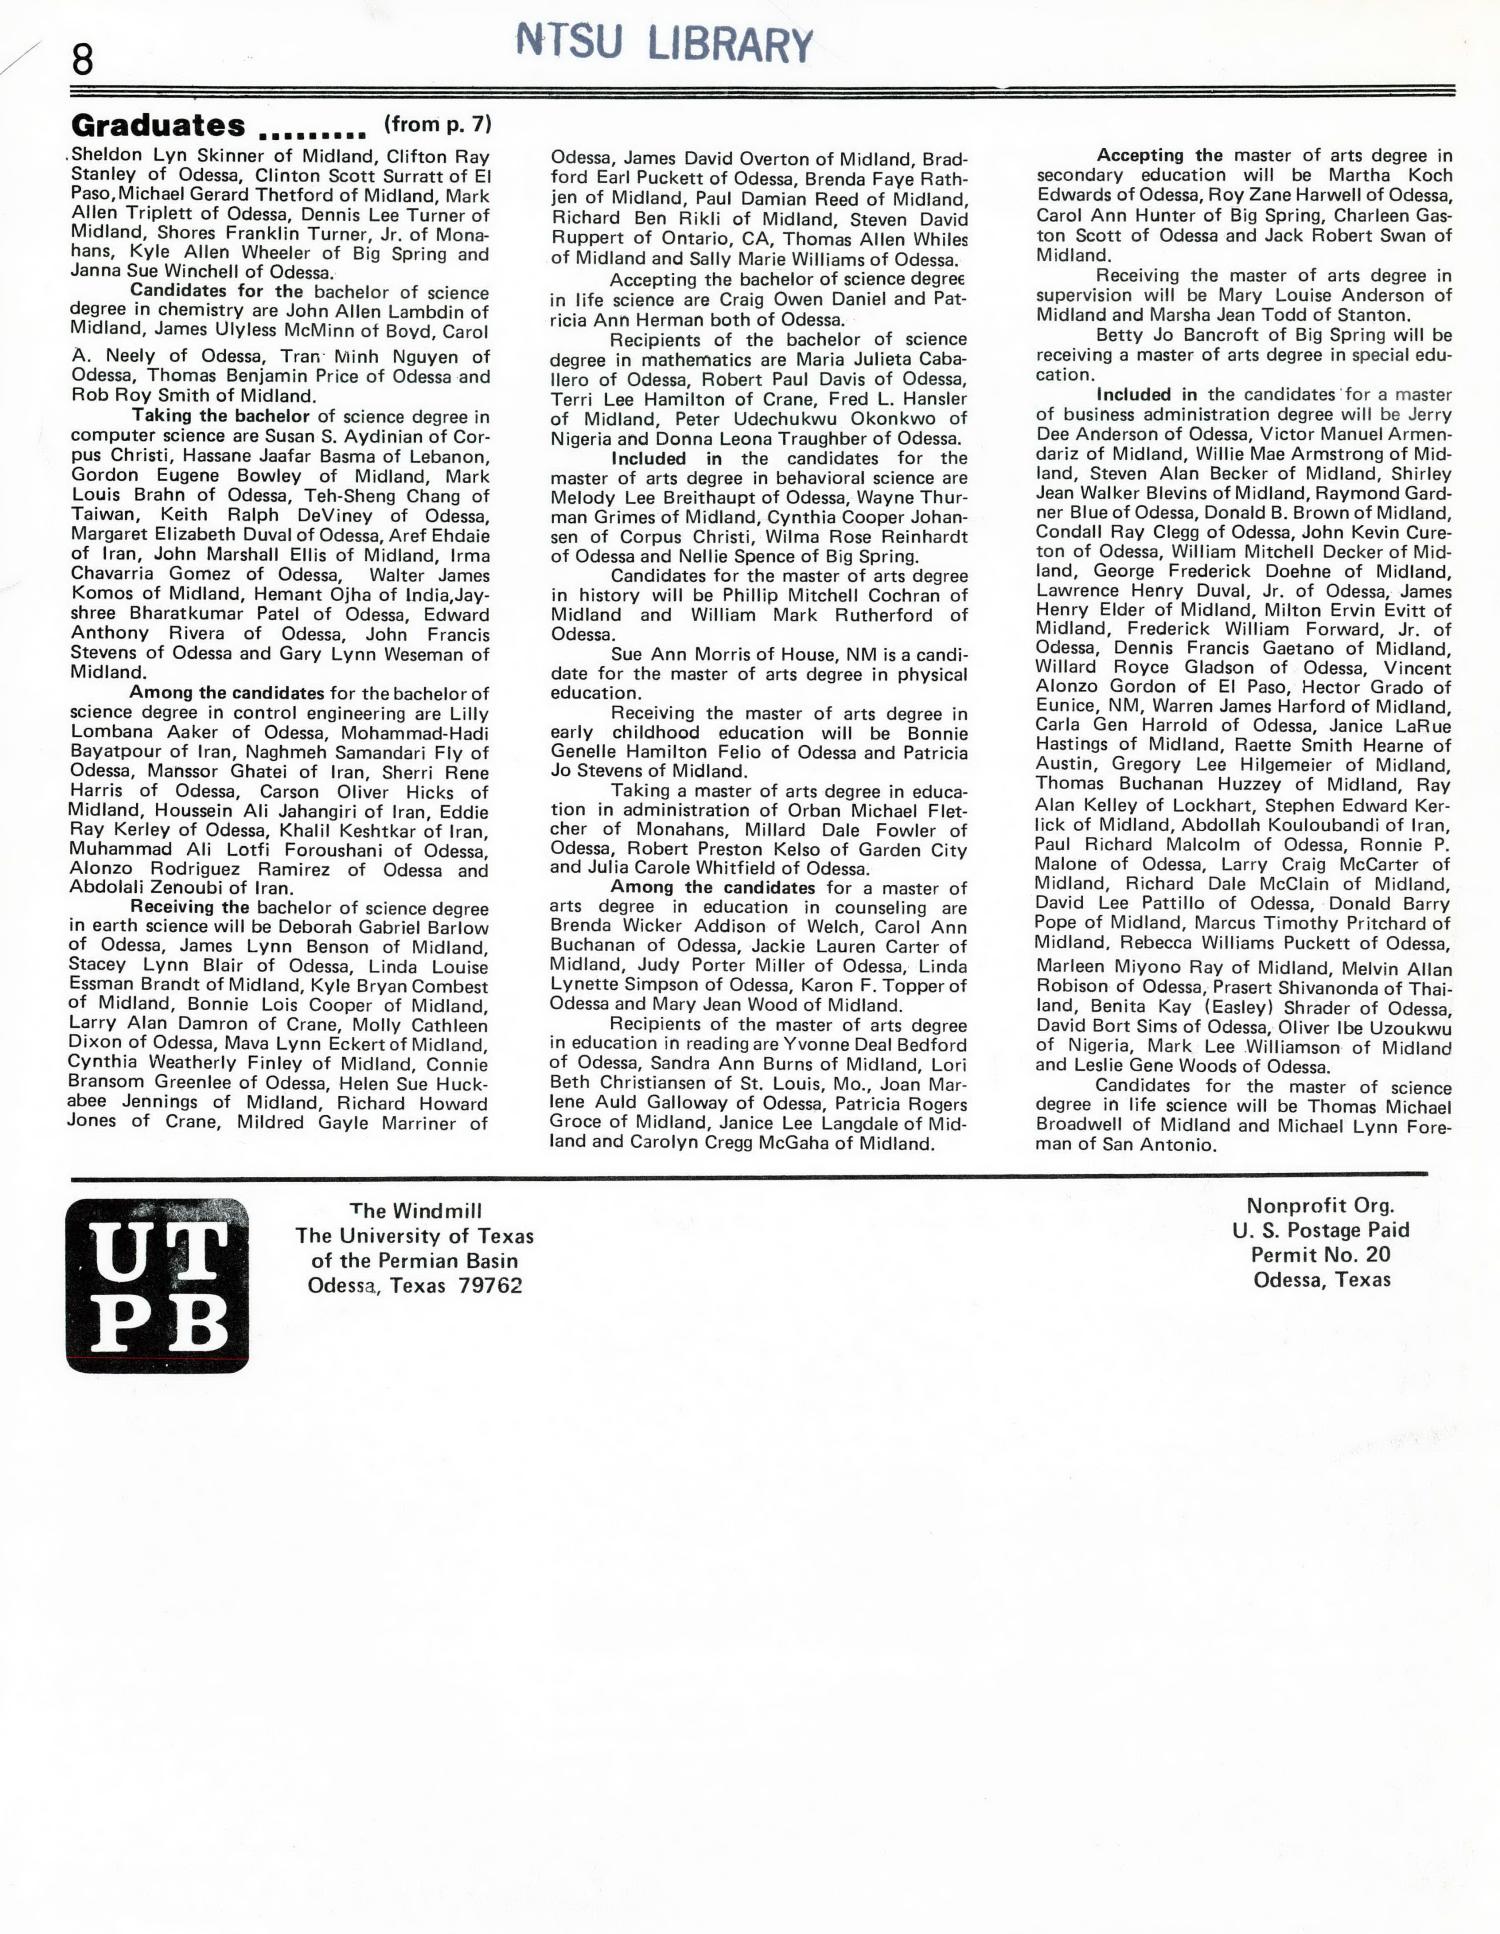 The Windmill, Volume 8, Number 8, April/May 1982
                                                
                                                    Back Cover
                                                